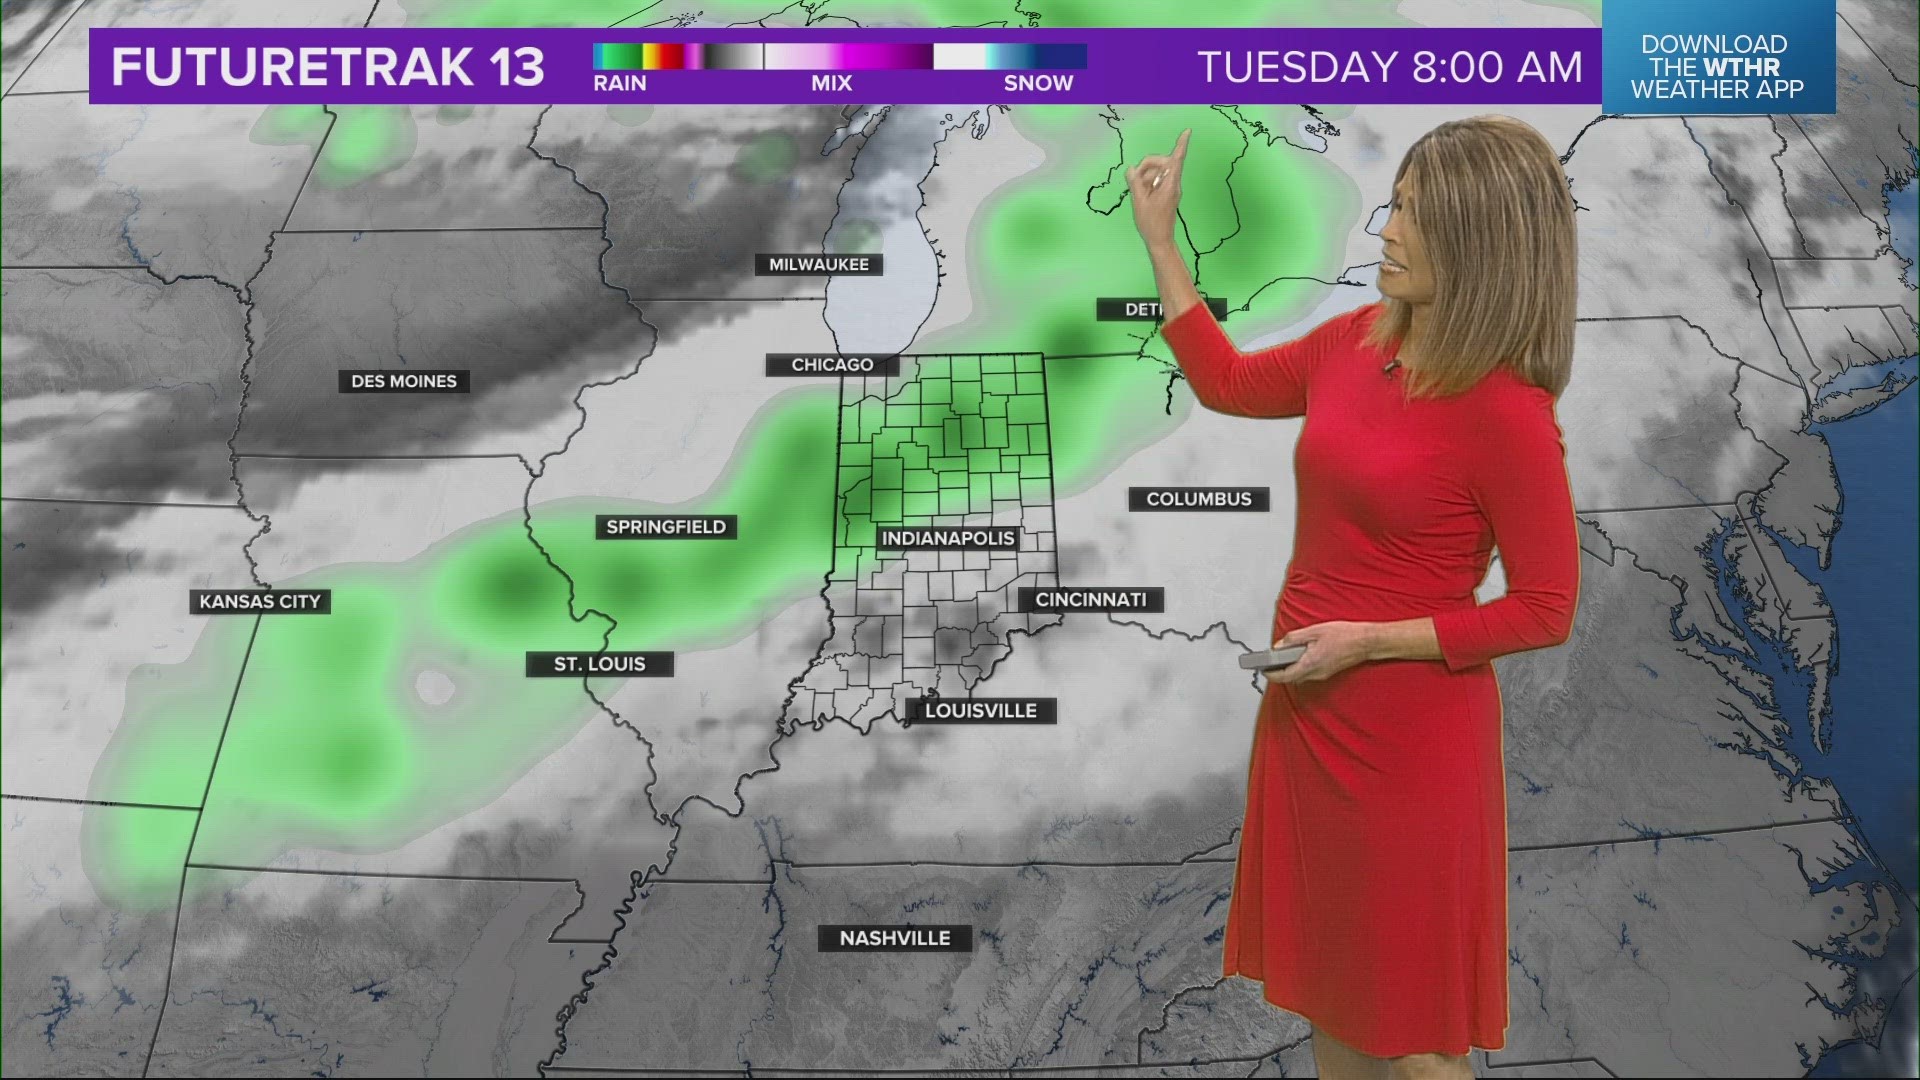 13News meteorologist Angela Buchman previews the weekend weather in central Indiana.